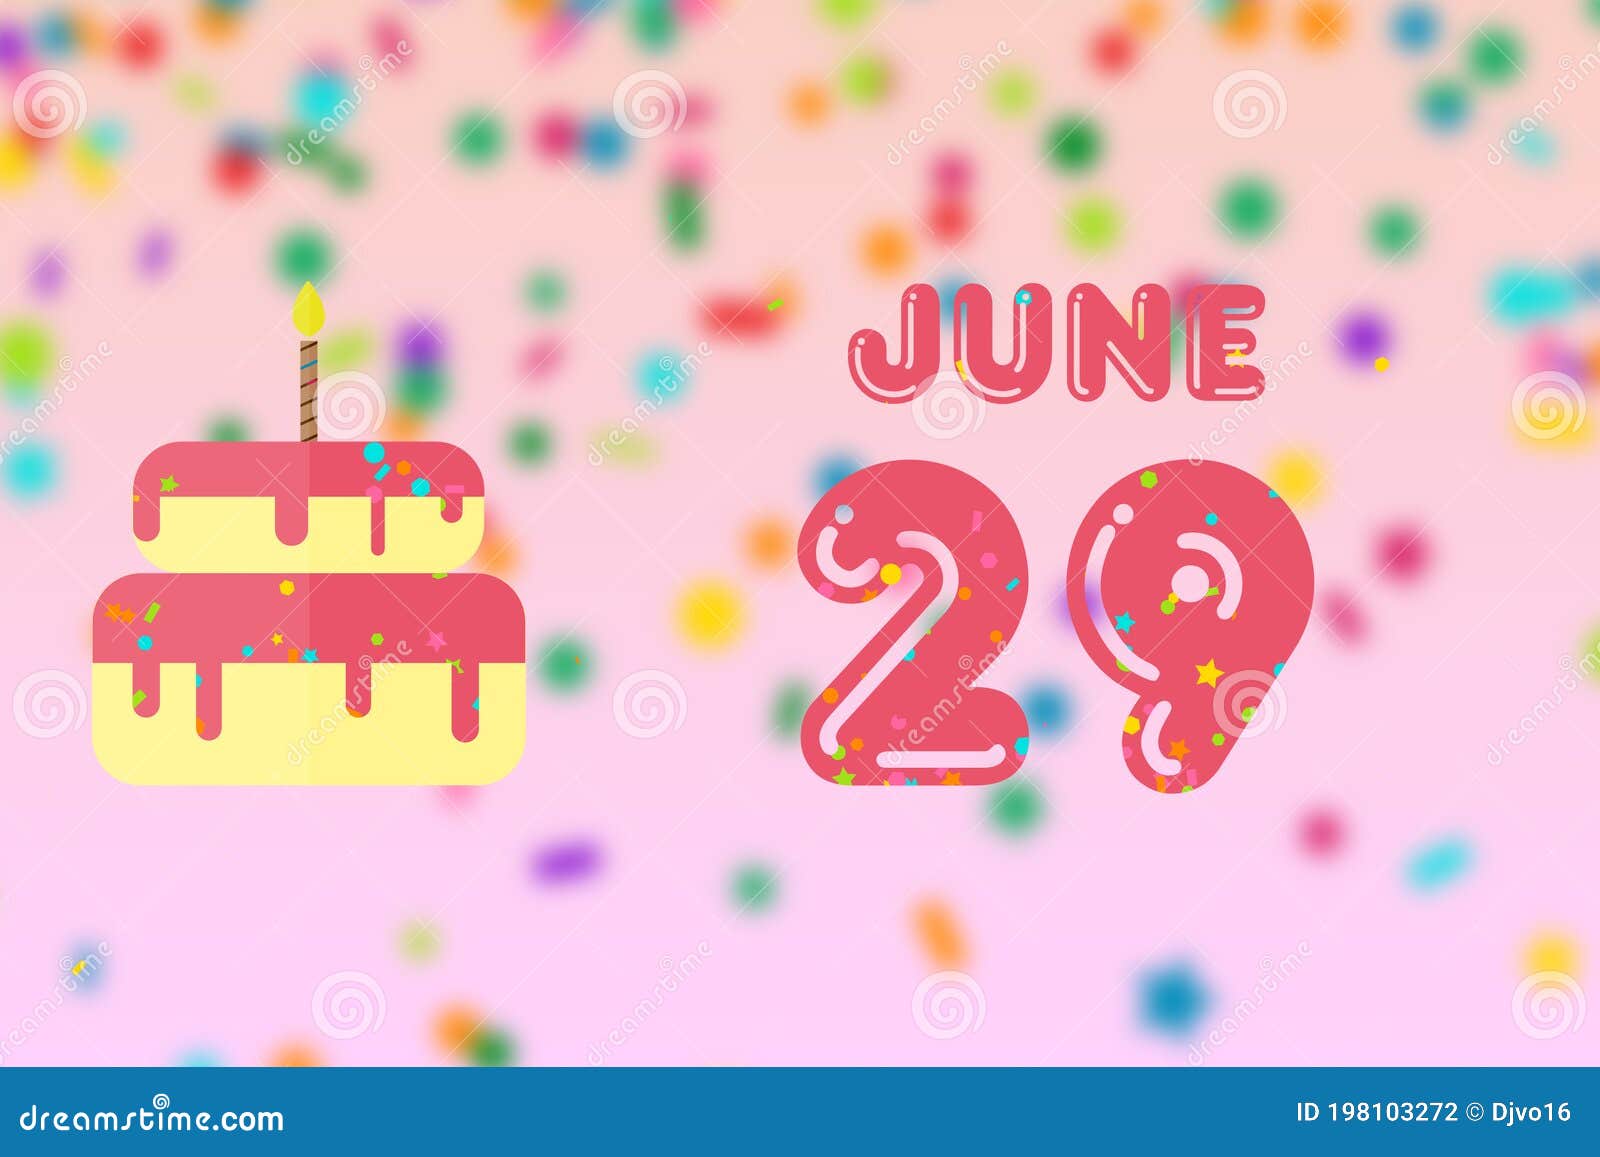 June 29th. Day 29 of Month,Birthday Greeting Card with Date of Birth and Birthday Cake. Summer Month, Day of the Year Concept Stock Illustration - Illustration of summer, annual: 198103272